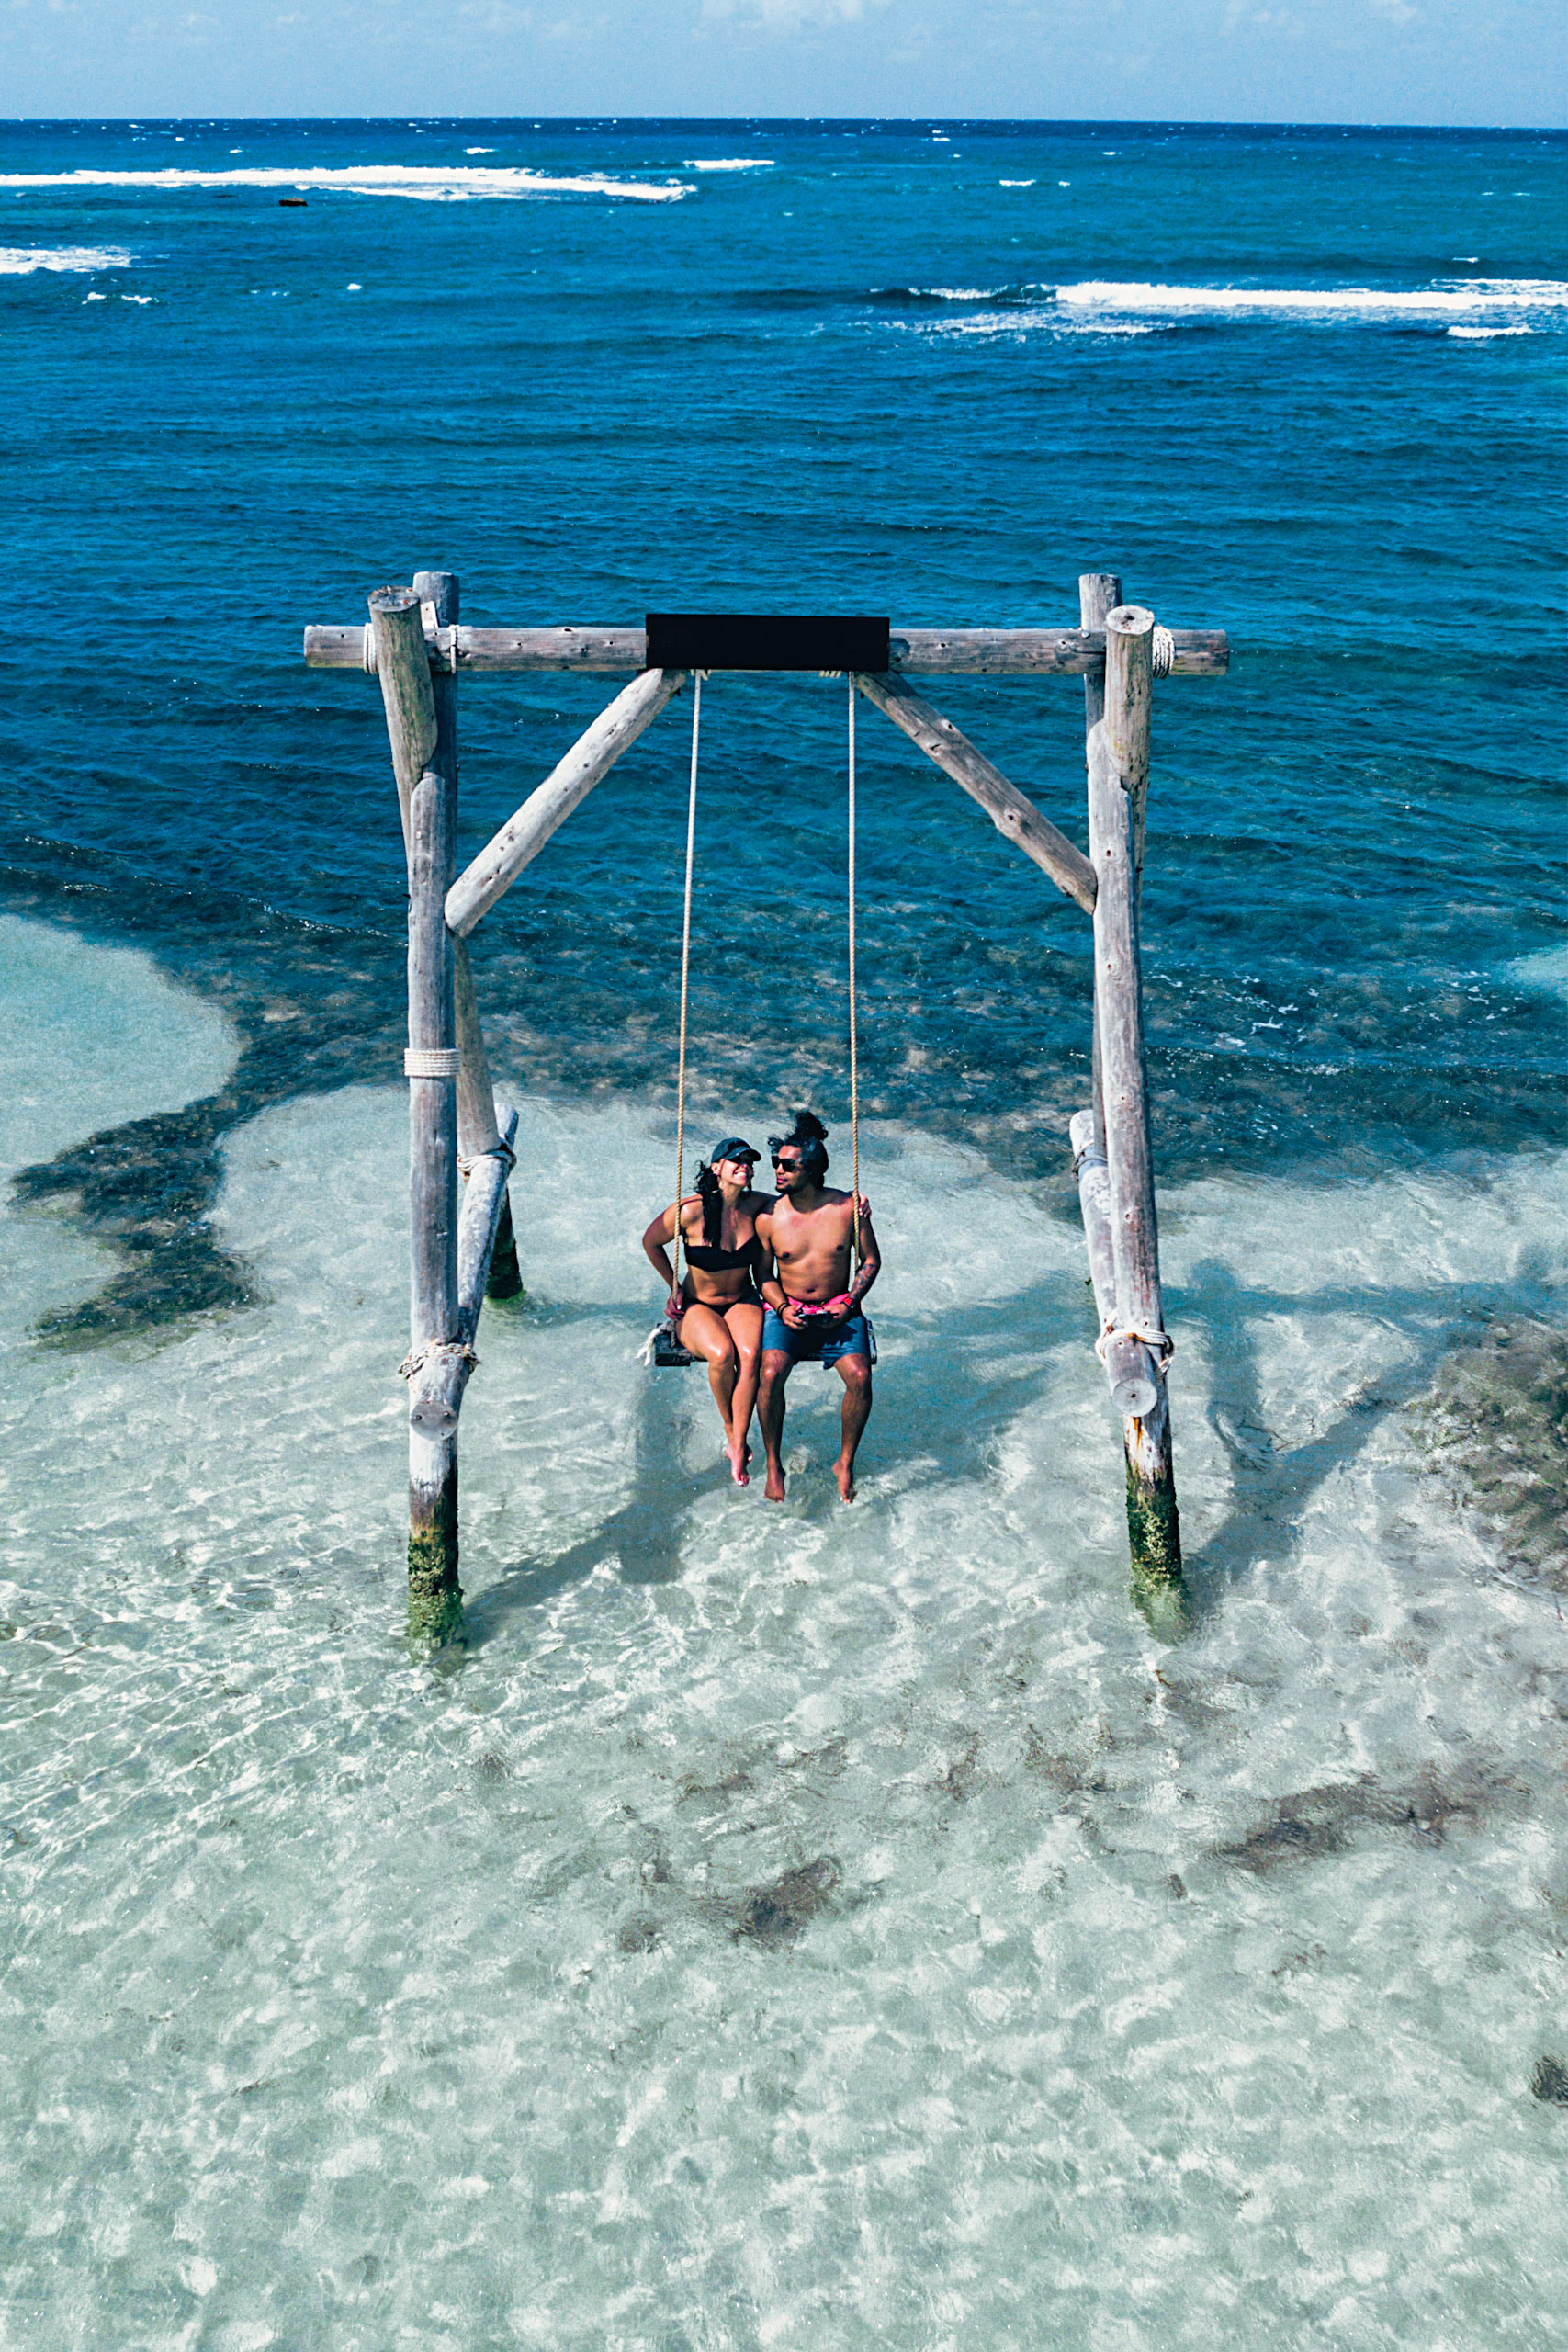 Dan and Emily Mall on a swing in the ocean